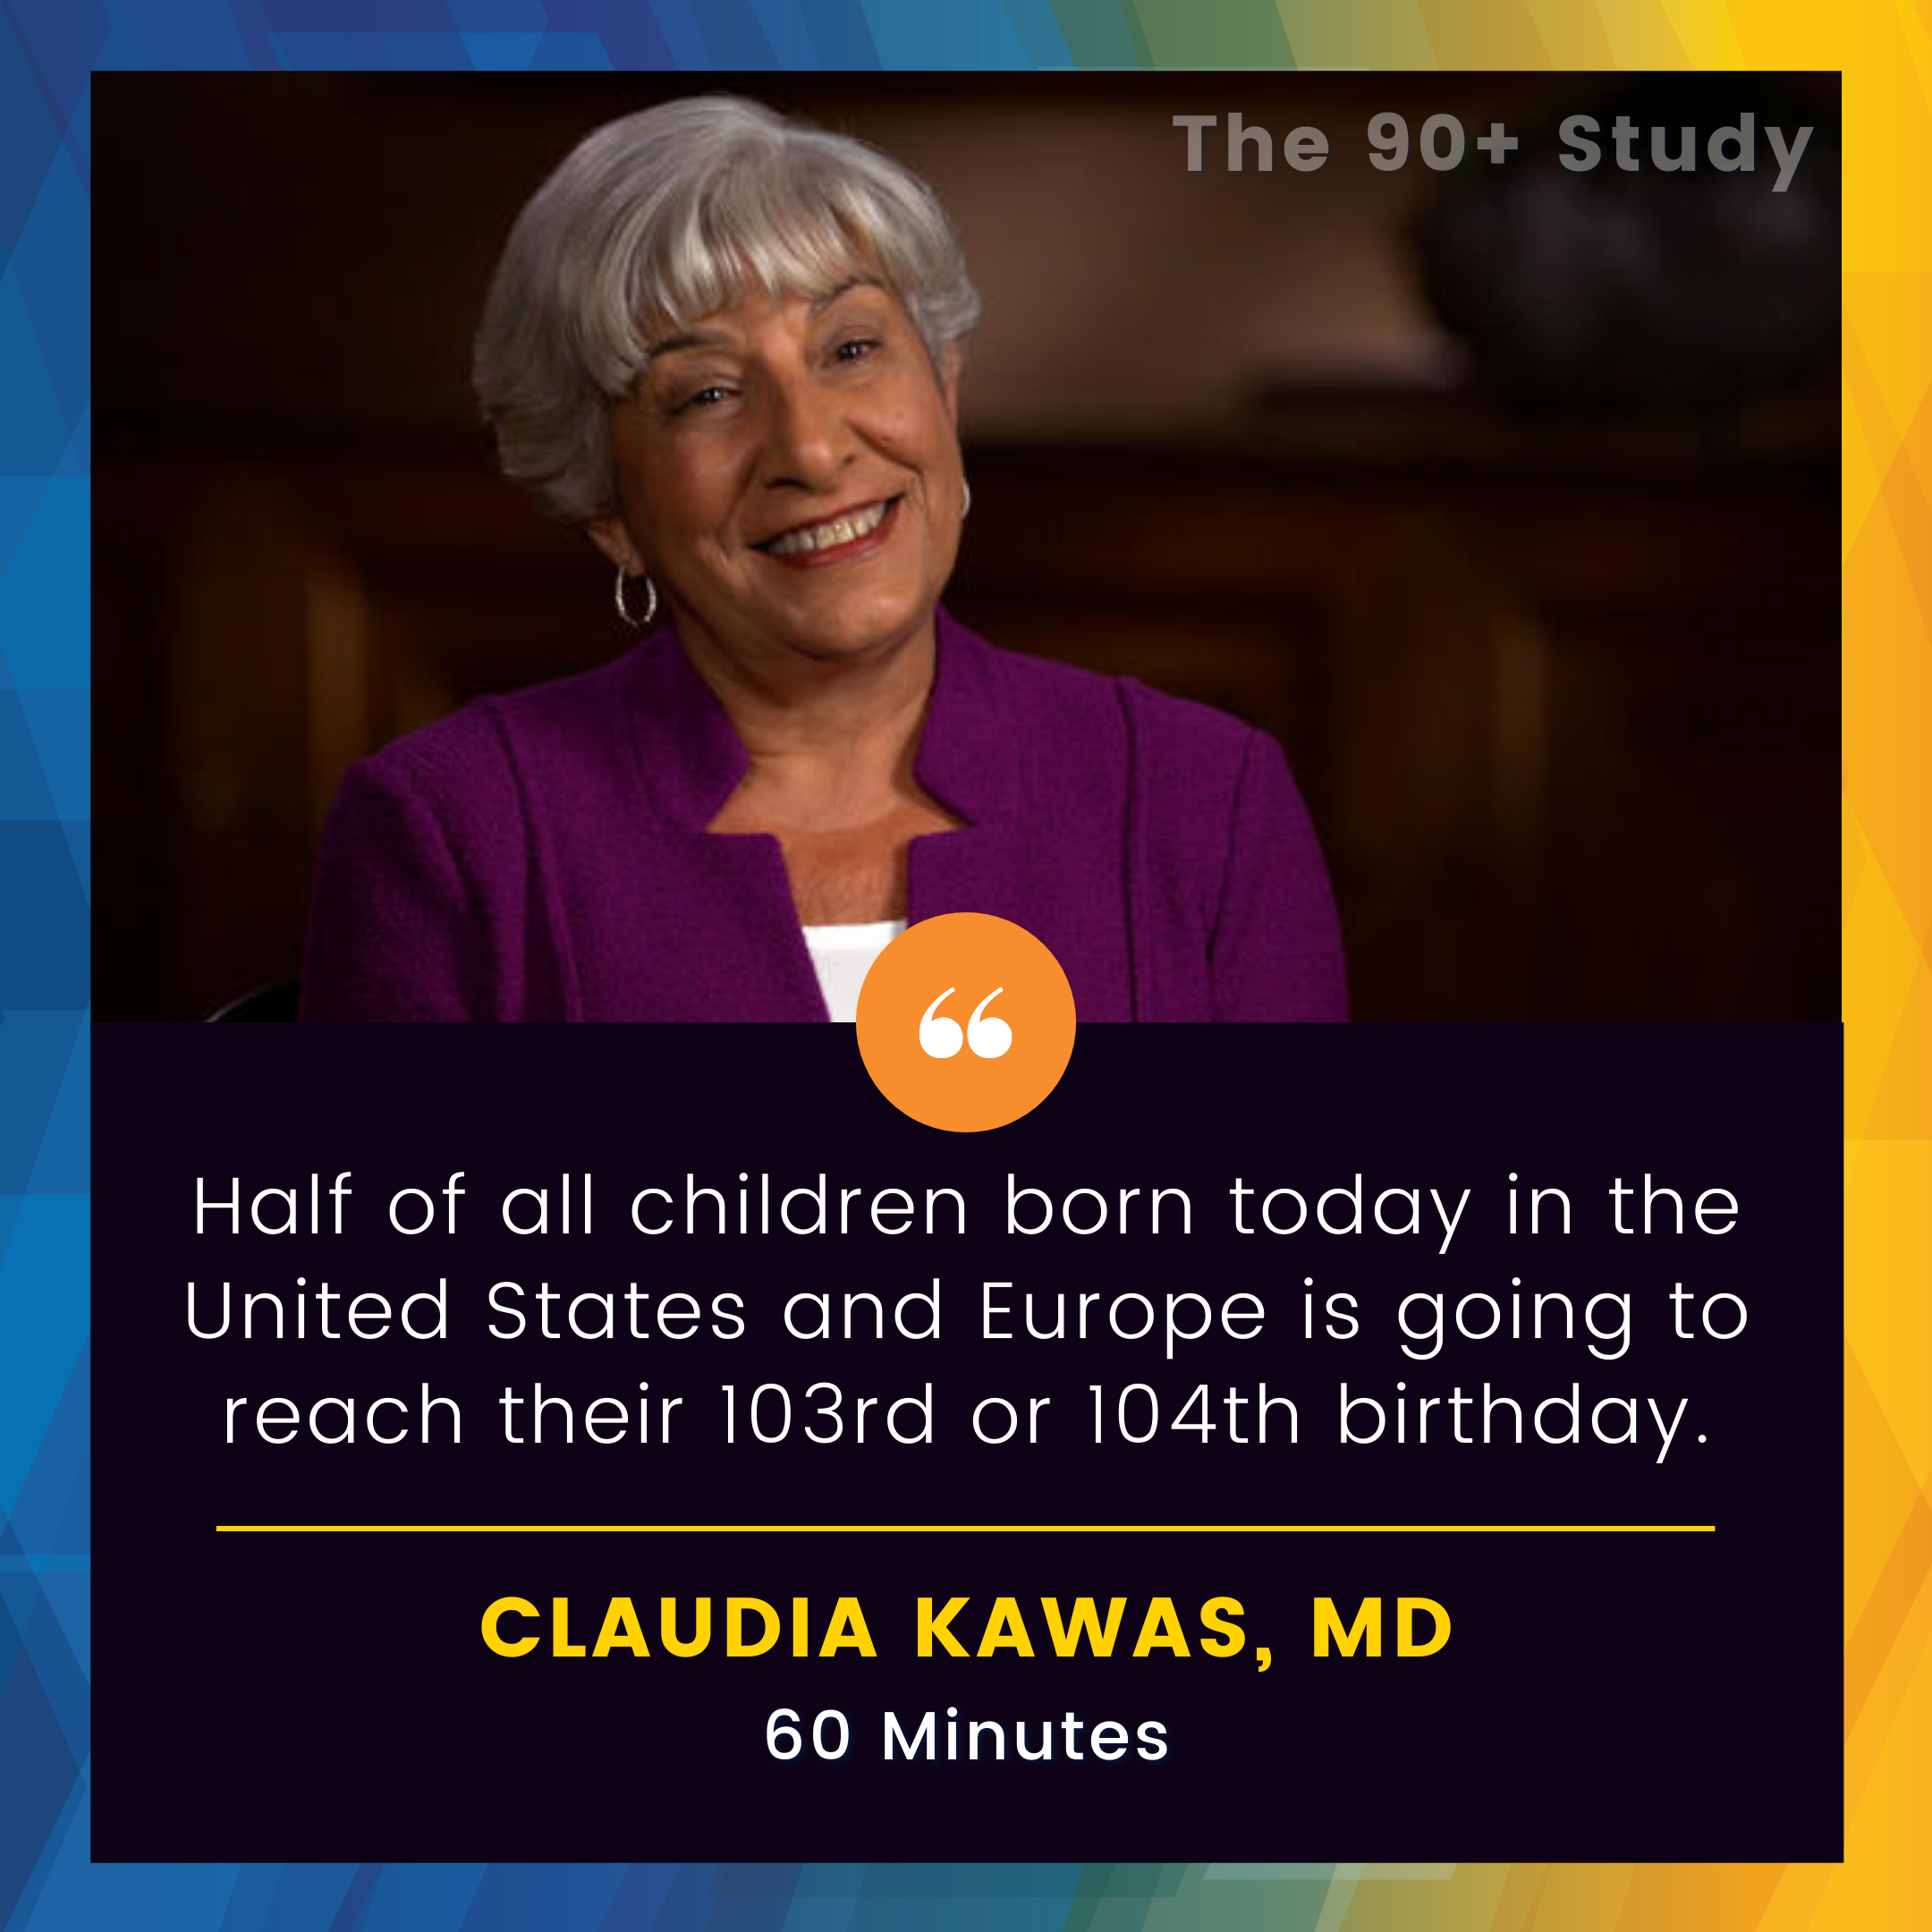 Headshot of Claudia Kawas, MD. above her quote saying "Half of all children born today in the Unites States and Europe is going to reach their 103rd or 104th birthday"